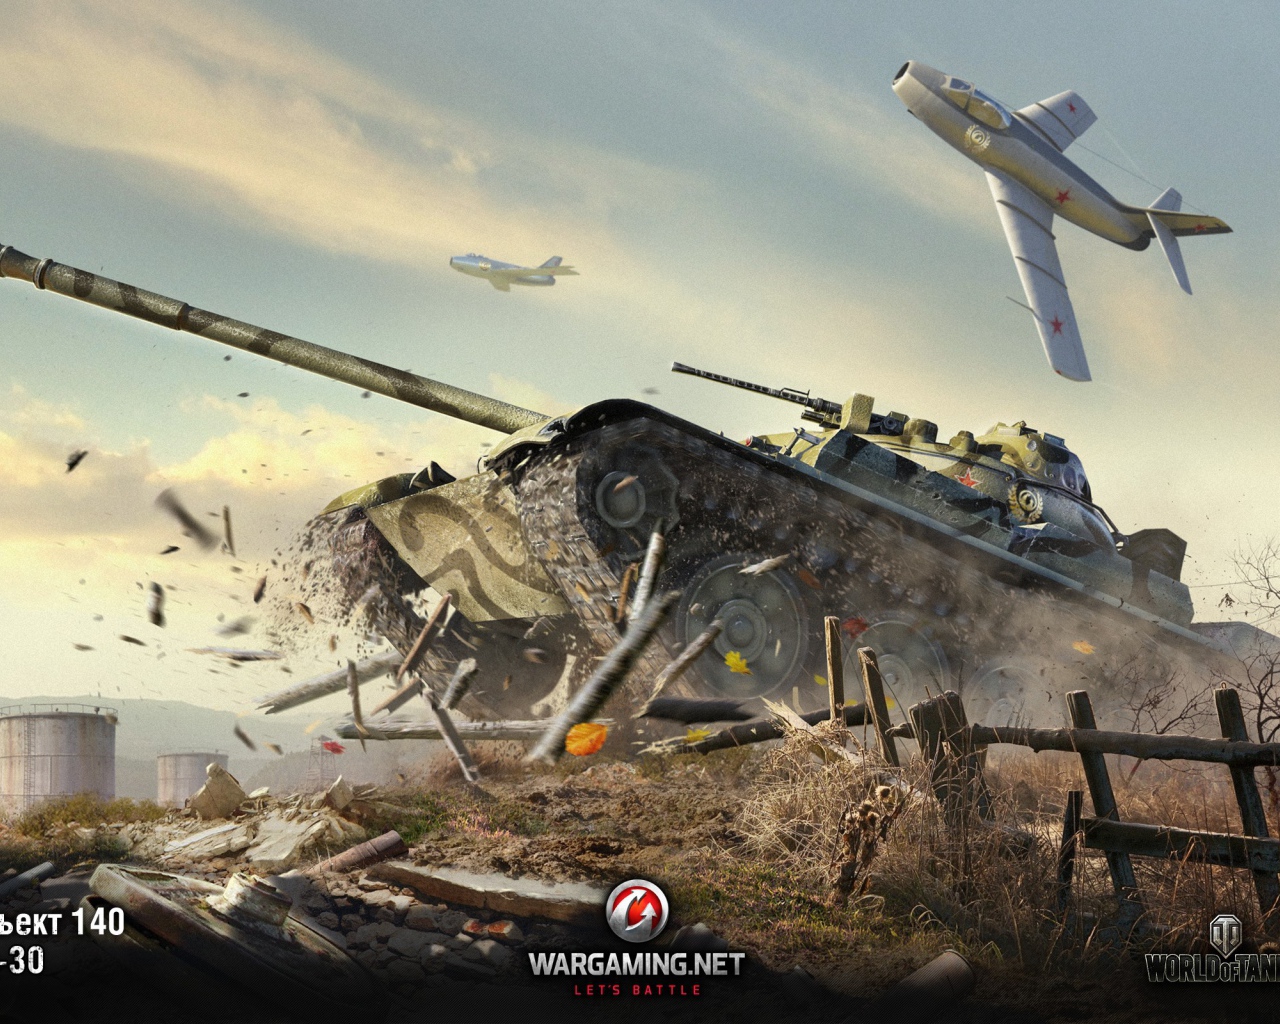 Plane over the tank in the game World of Tanks